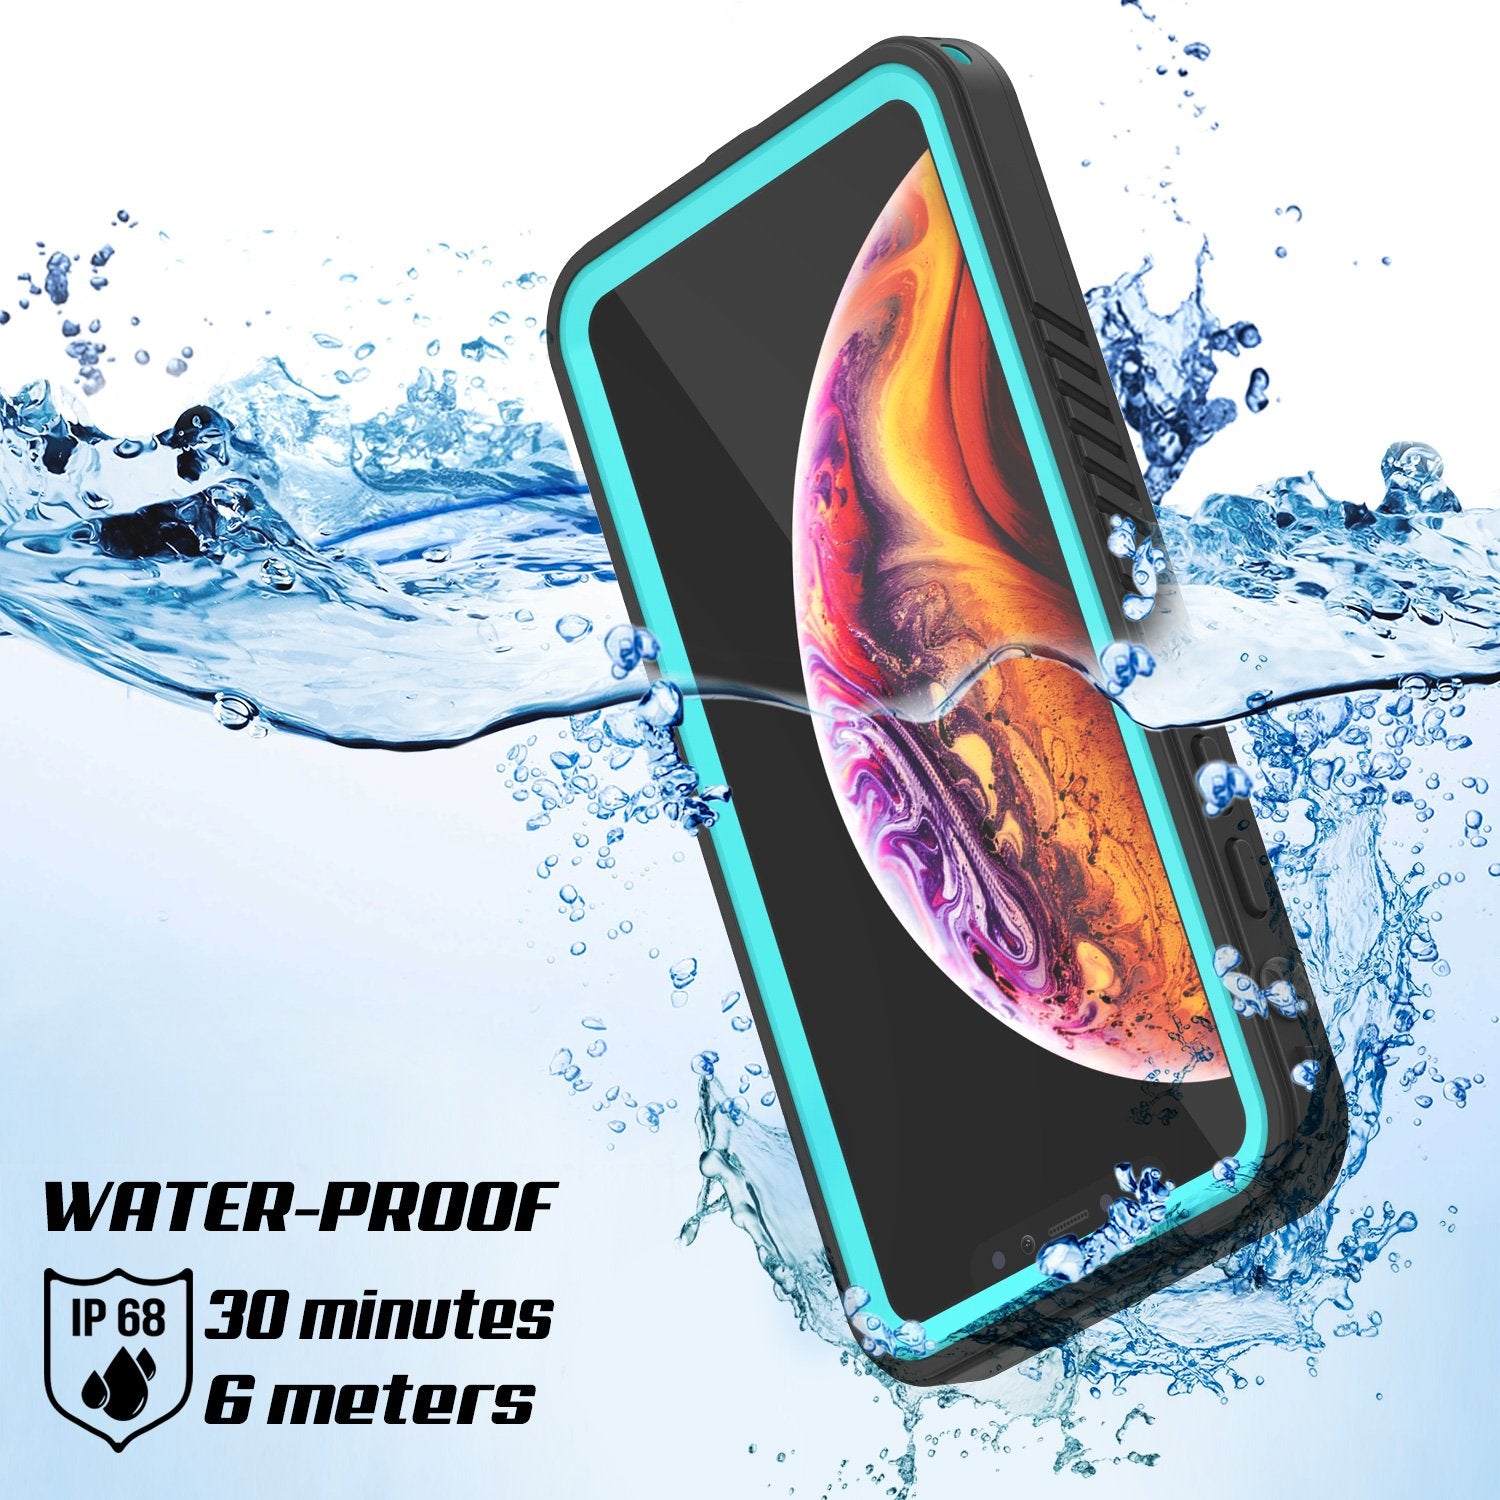 iPhone XR Waterproof Case, Punkcase [Extreme Series] Armor Cover W/ Built In Screen Protector [Teal] - PunkCase NZ